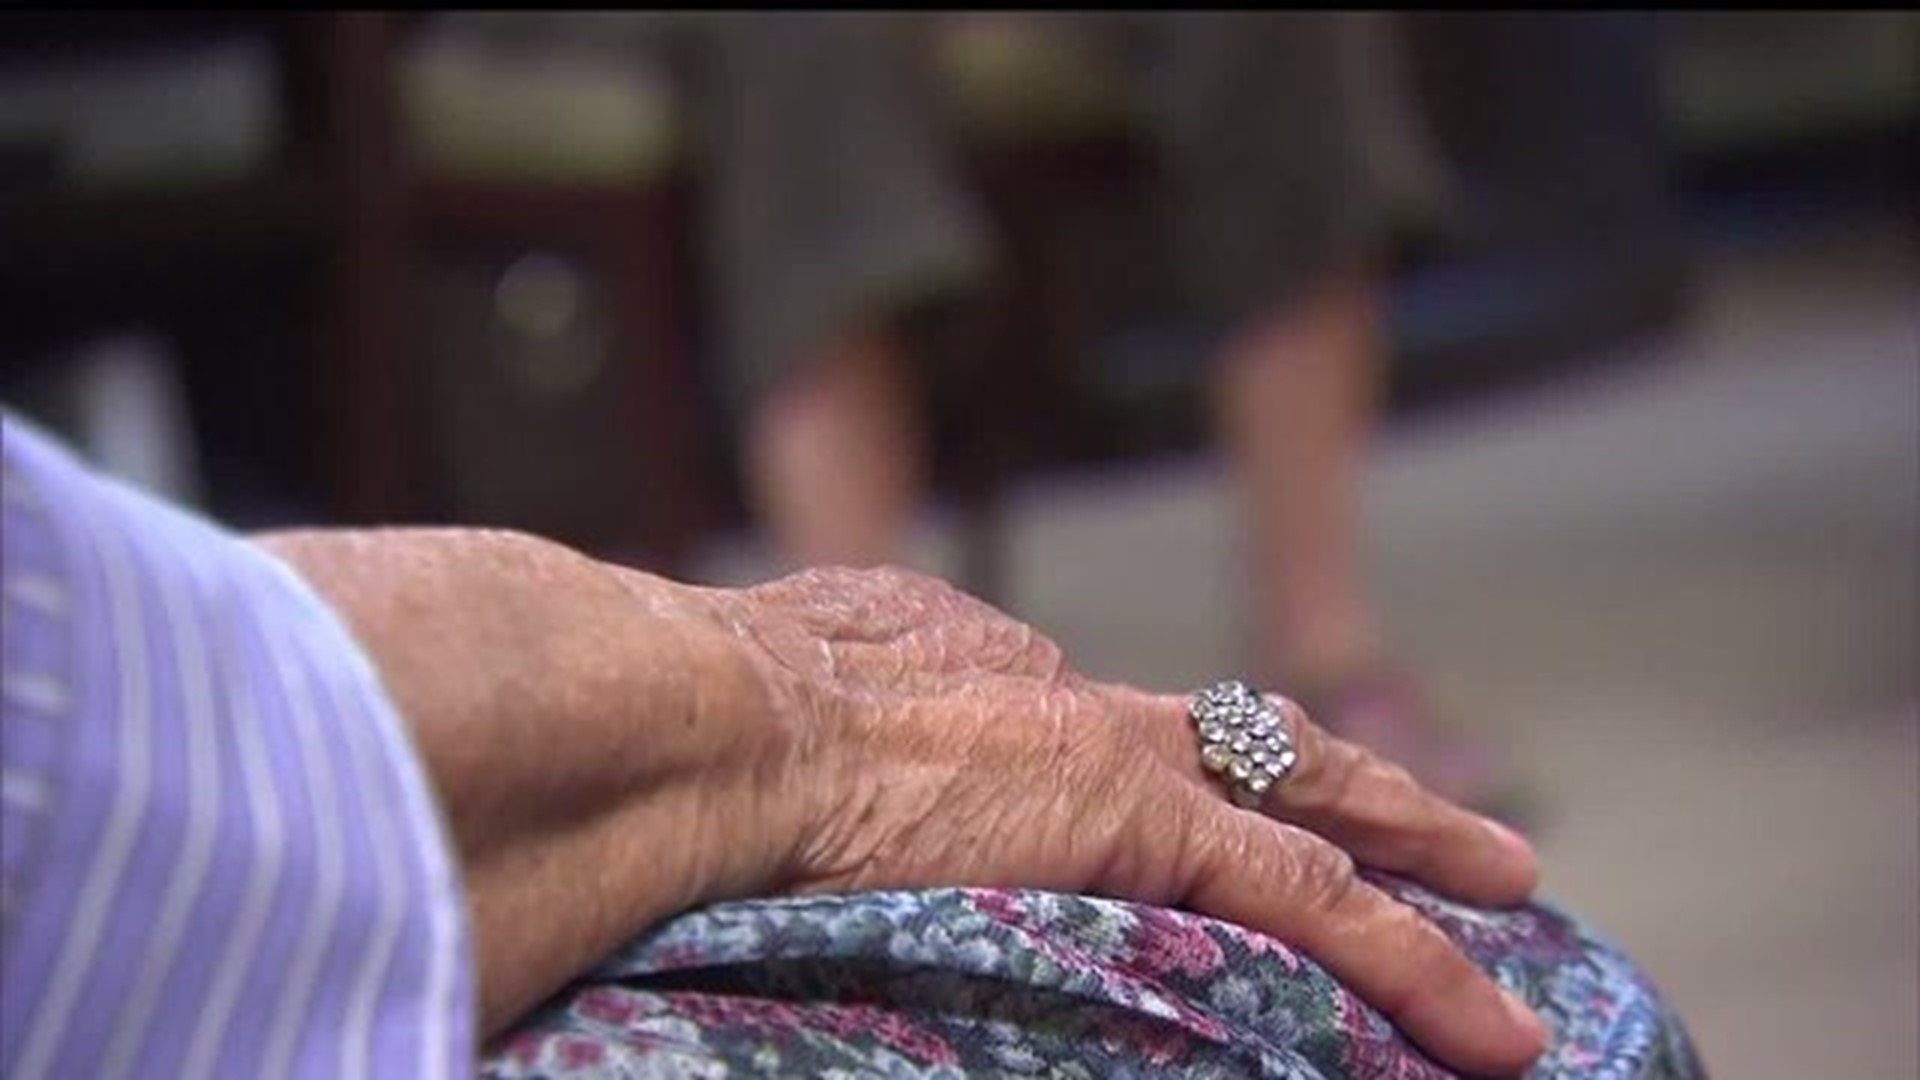 Officials looking for ways to stop the increase of elder abuse